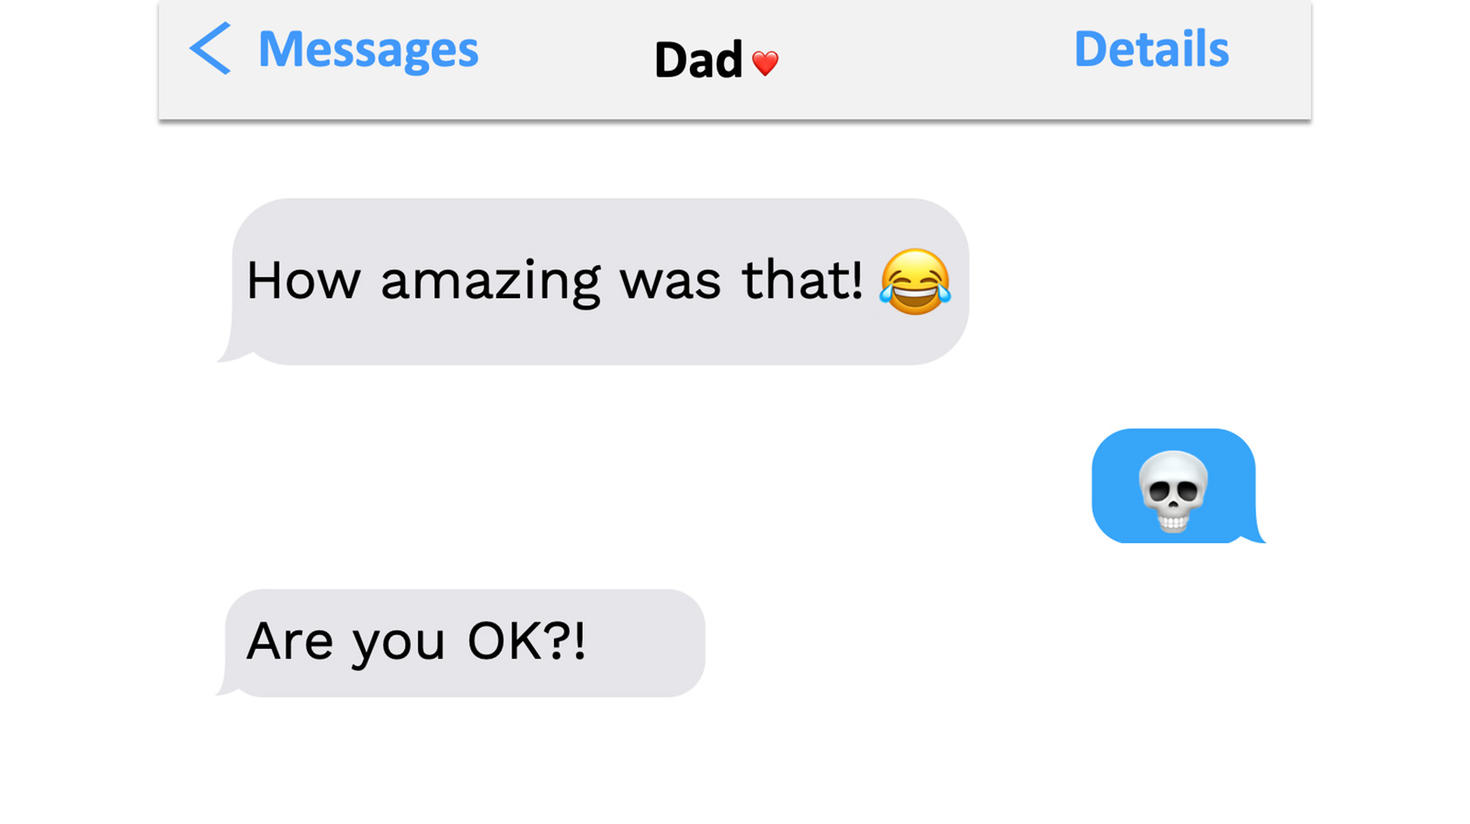 Screenshot of messages between dad and child using emojis